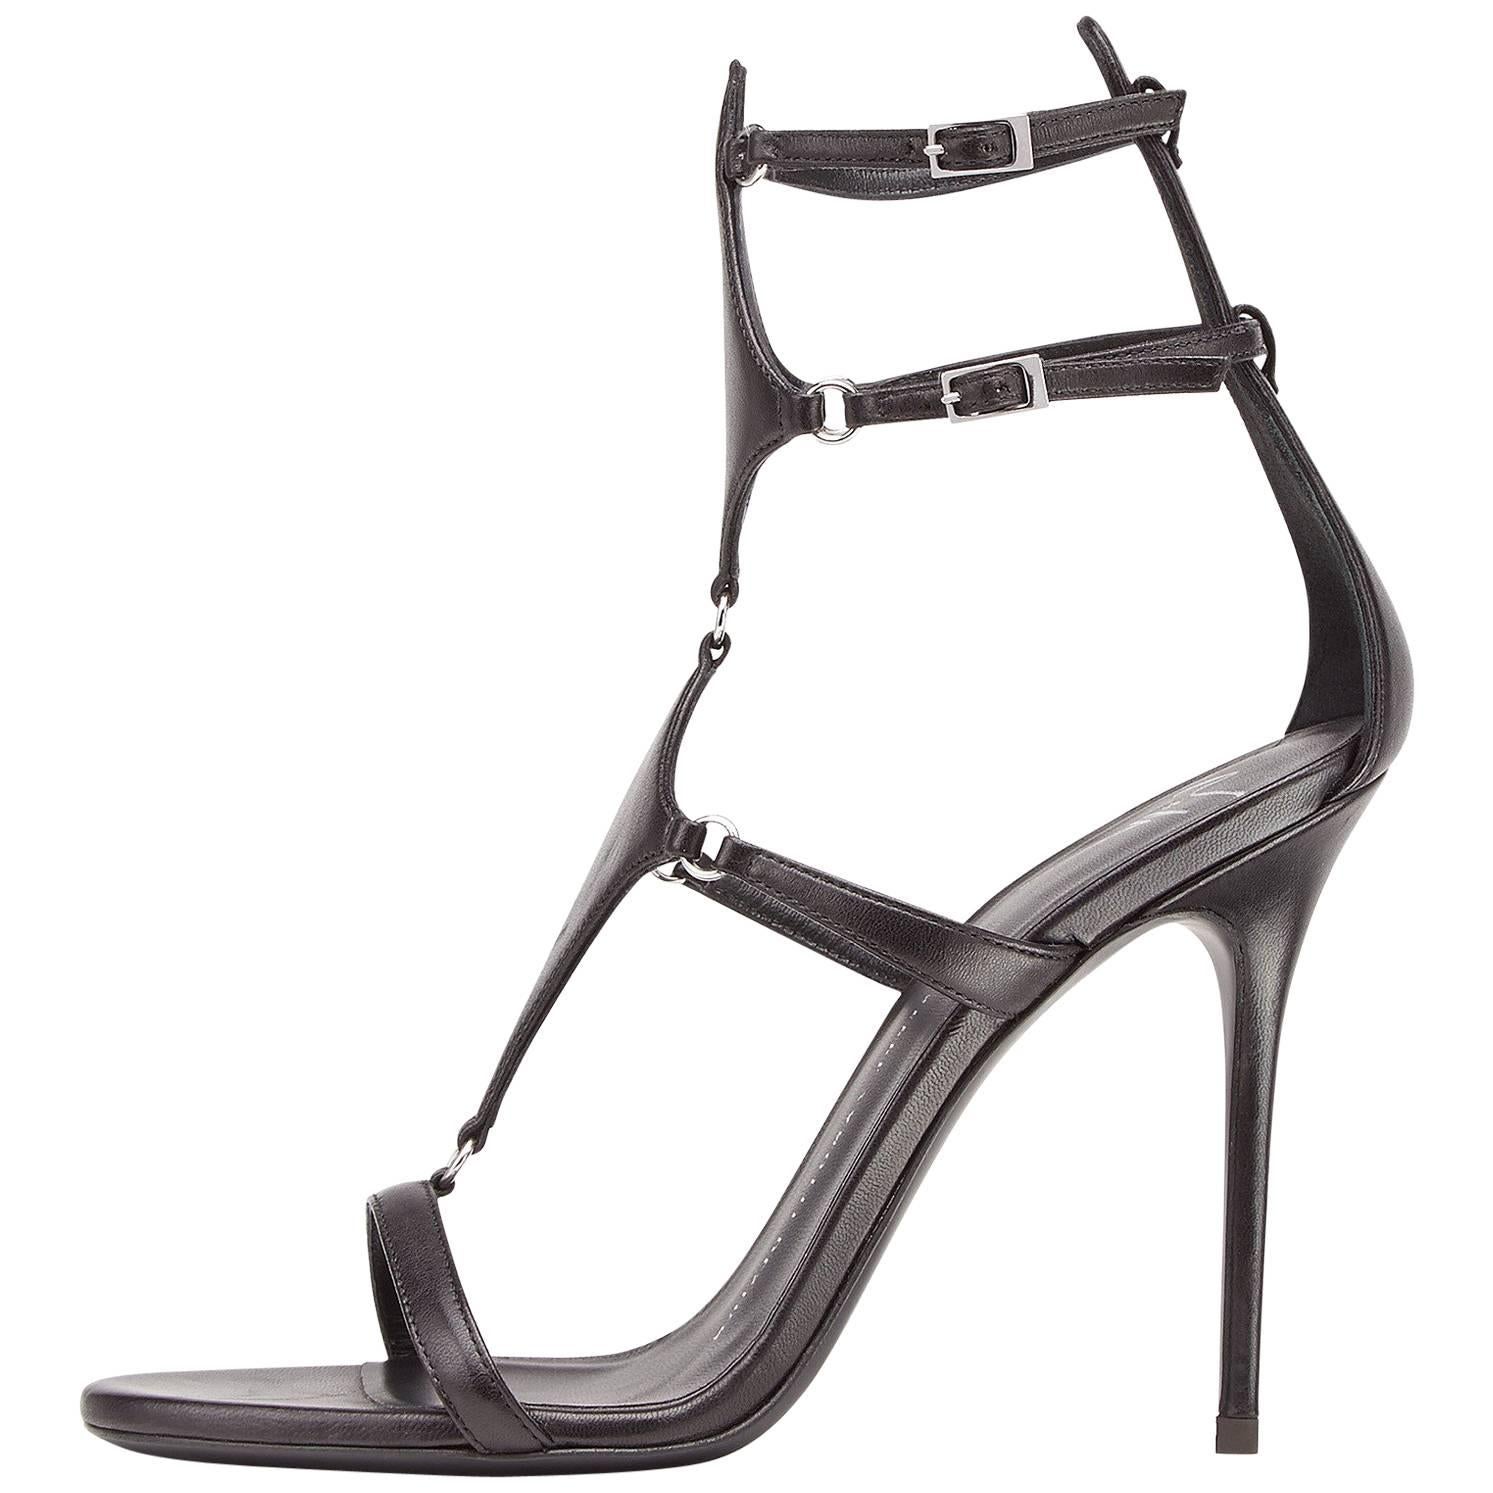 Giuseppe Zanotti New Black Leather Cut Out Strappy Evening Sandals Heels in Box